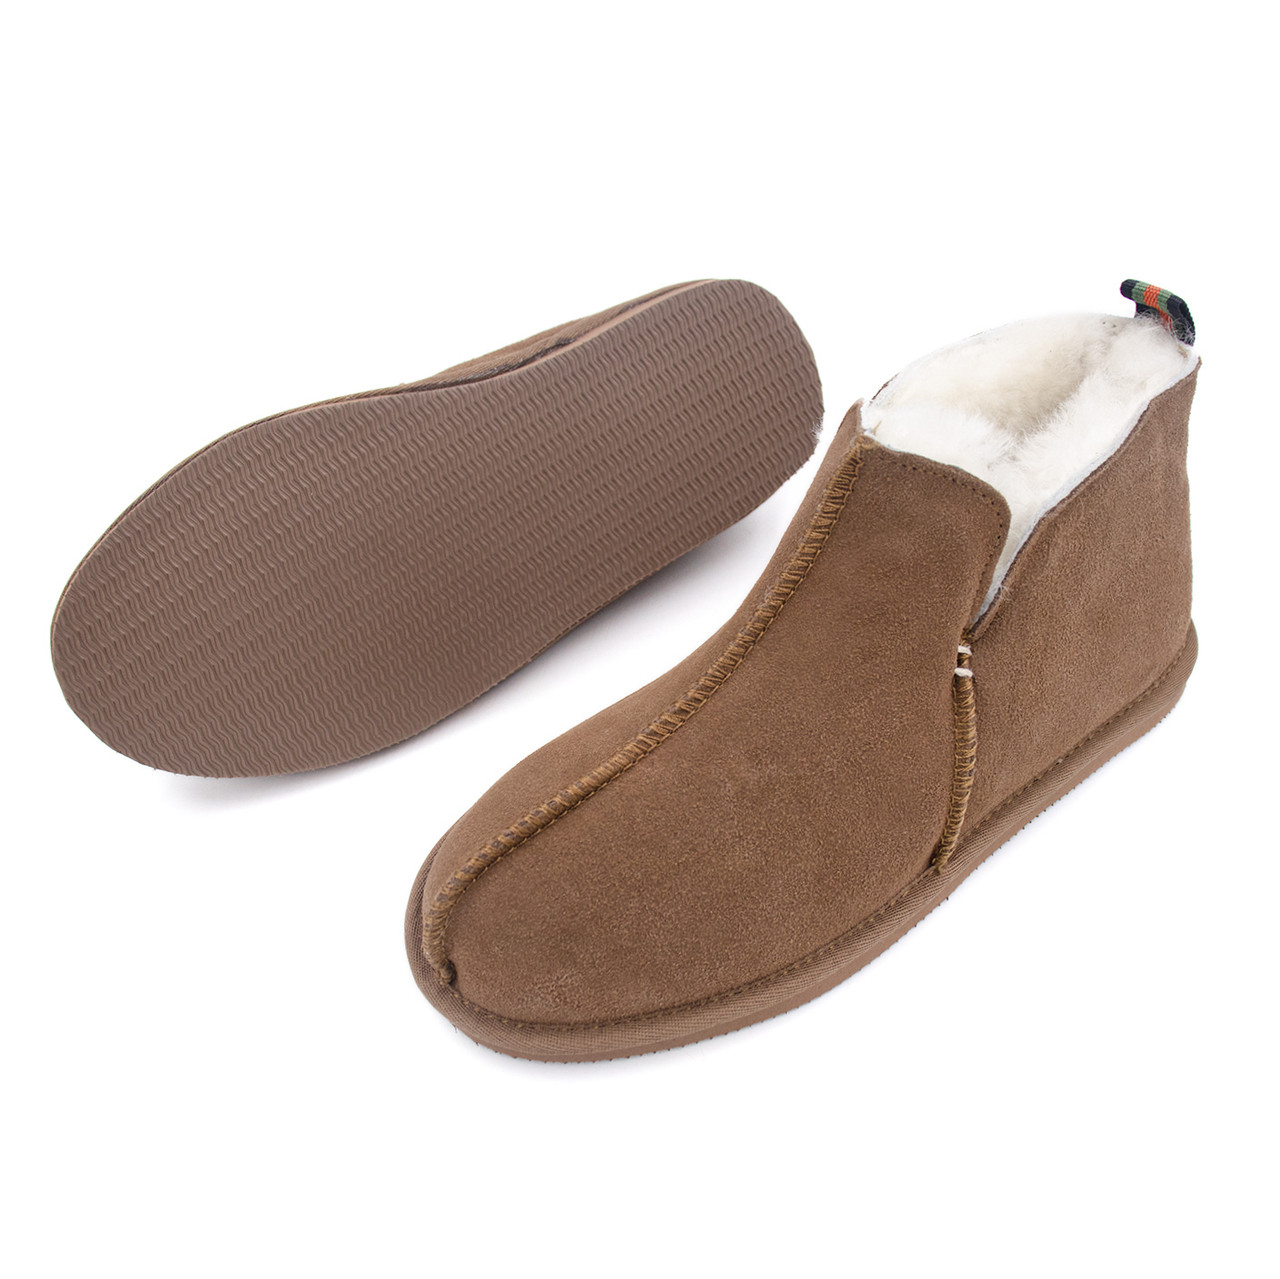 Pillow Paws Unisex Hard Sole Slippers